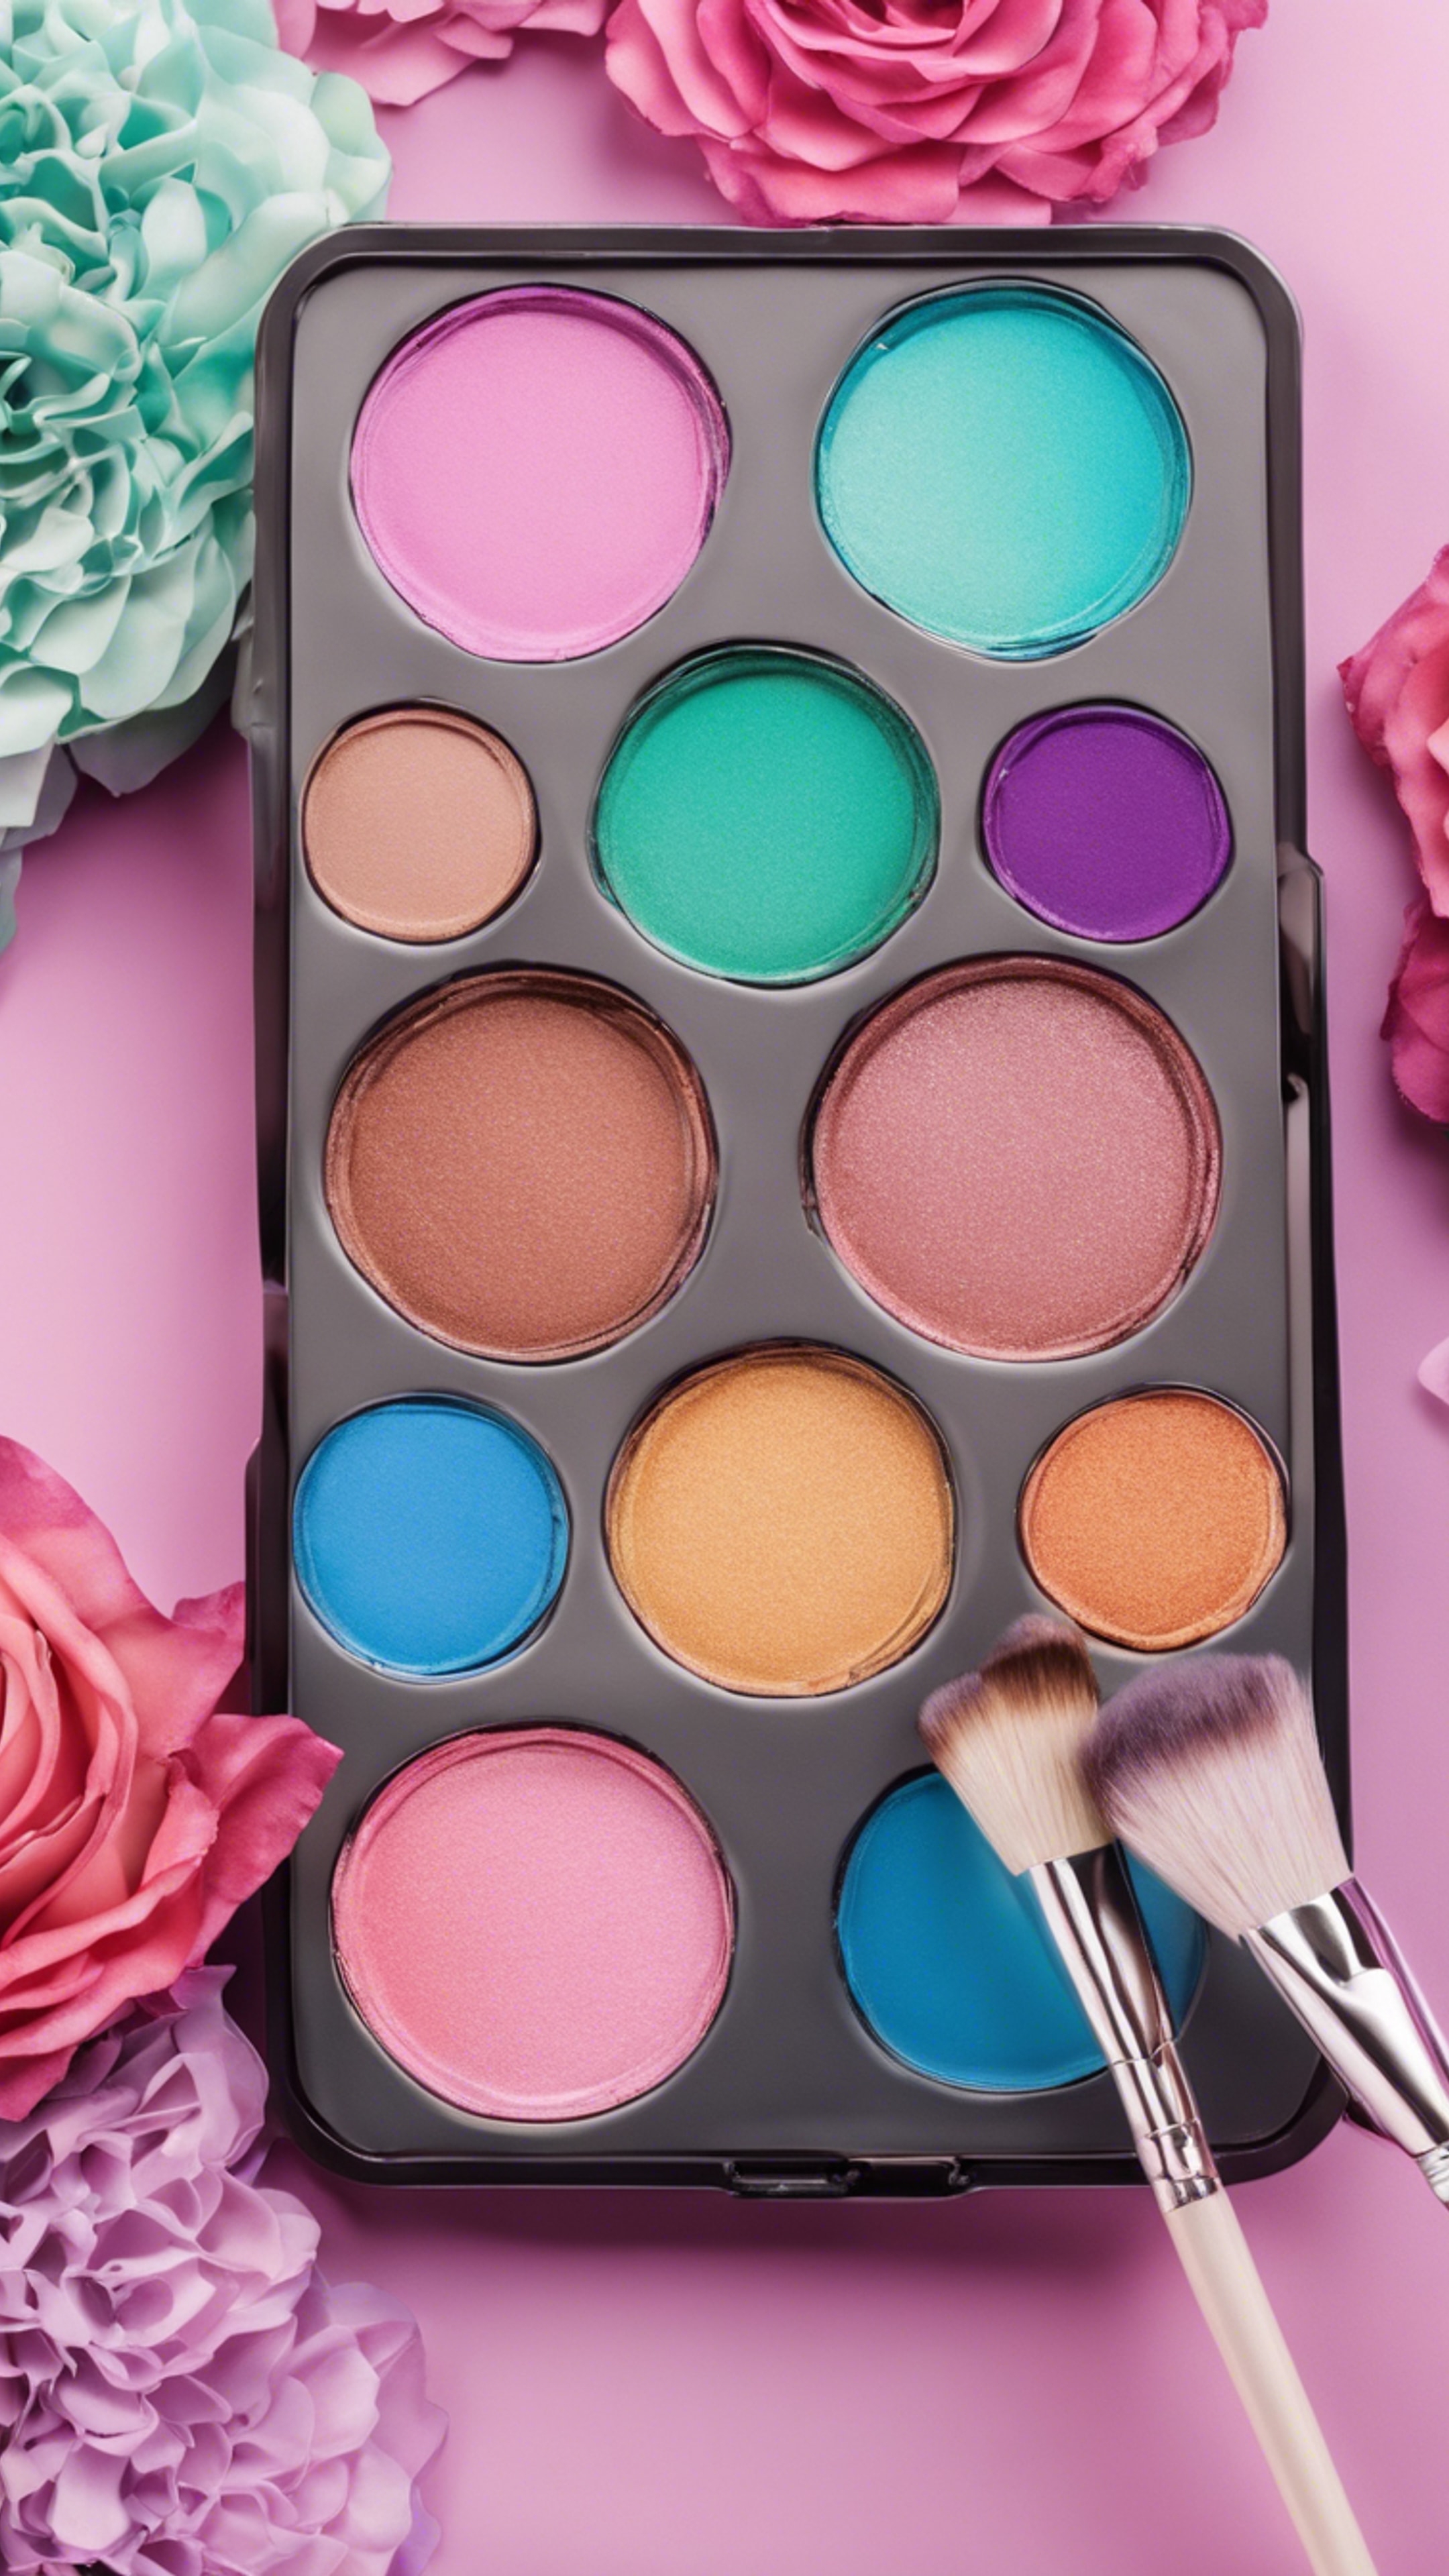 A cute girly makeup palette with a variety of vibrant colors and a brush for application. 牆紙[6f3ccf3758d549978770]